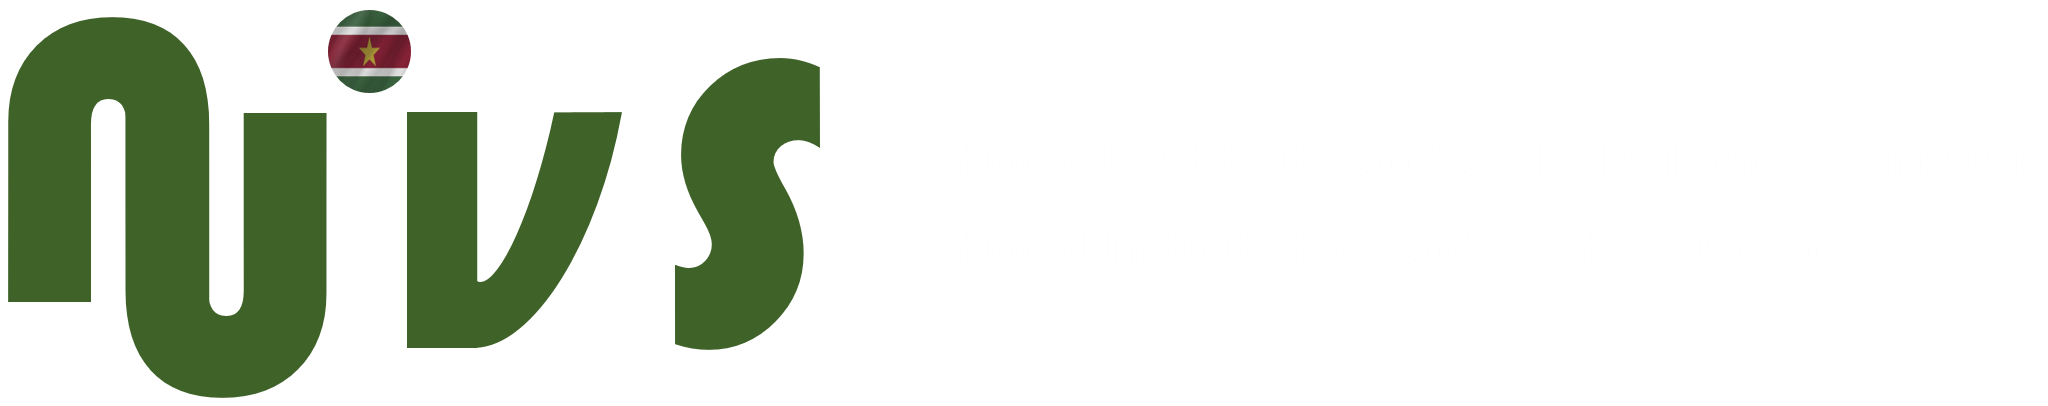 NIVS – National Institute for Food Safety Suriname